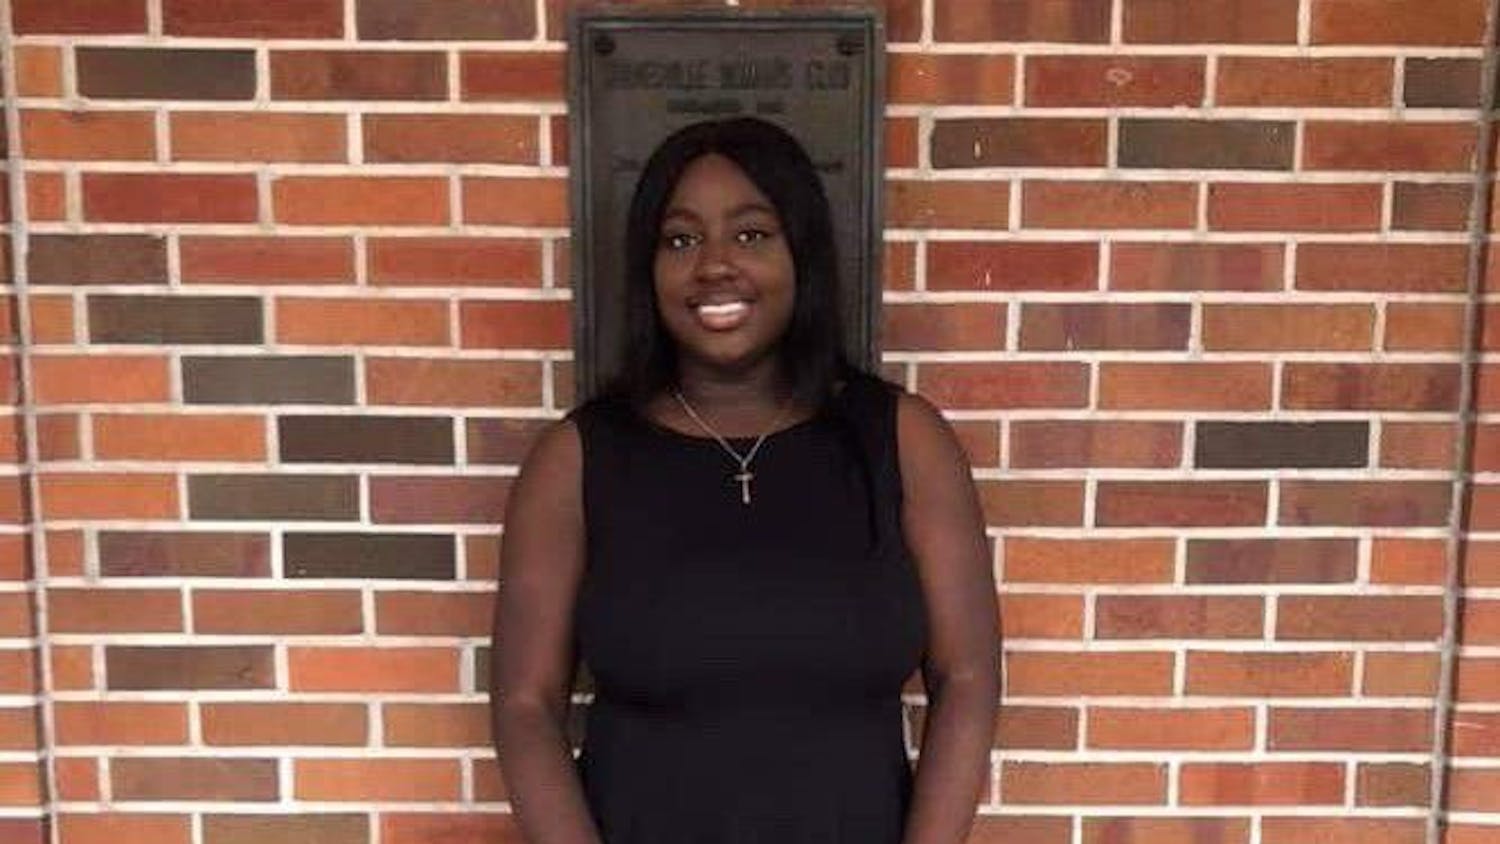 Denise Griffiths, a UF English language and literature senior, died Wednesday after succumbing to brain and spinal injuries. She was 21. Griffiths was a spoken word poet and aspiring rapper.